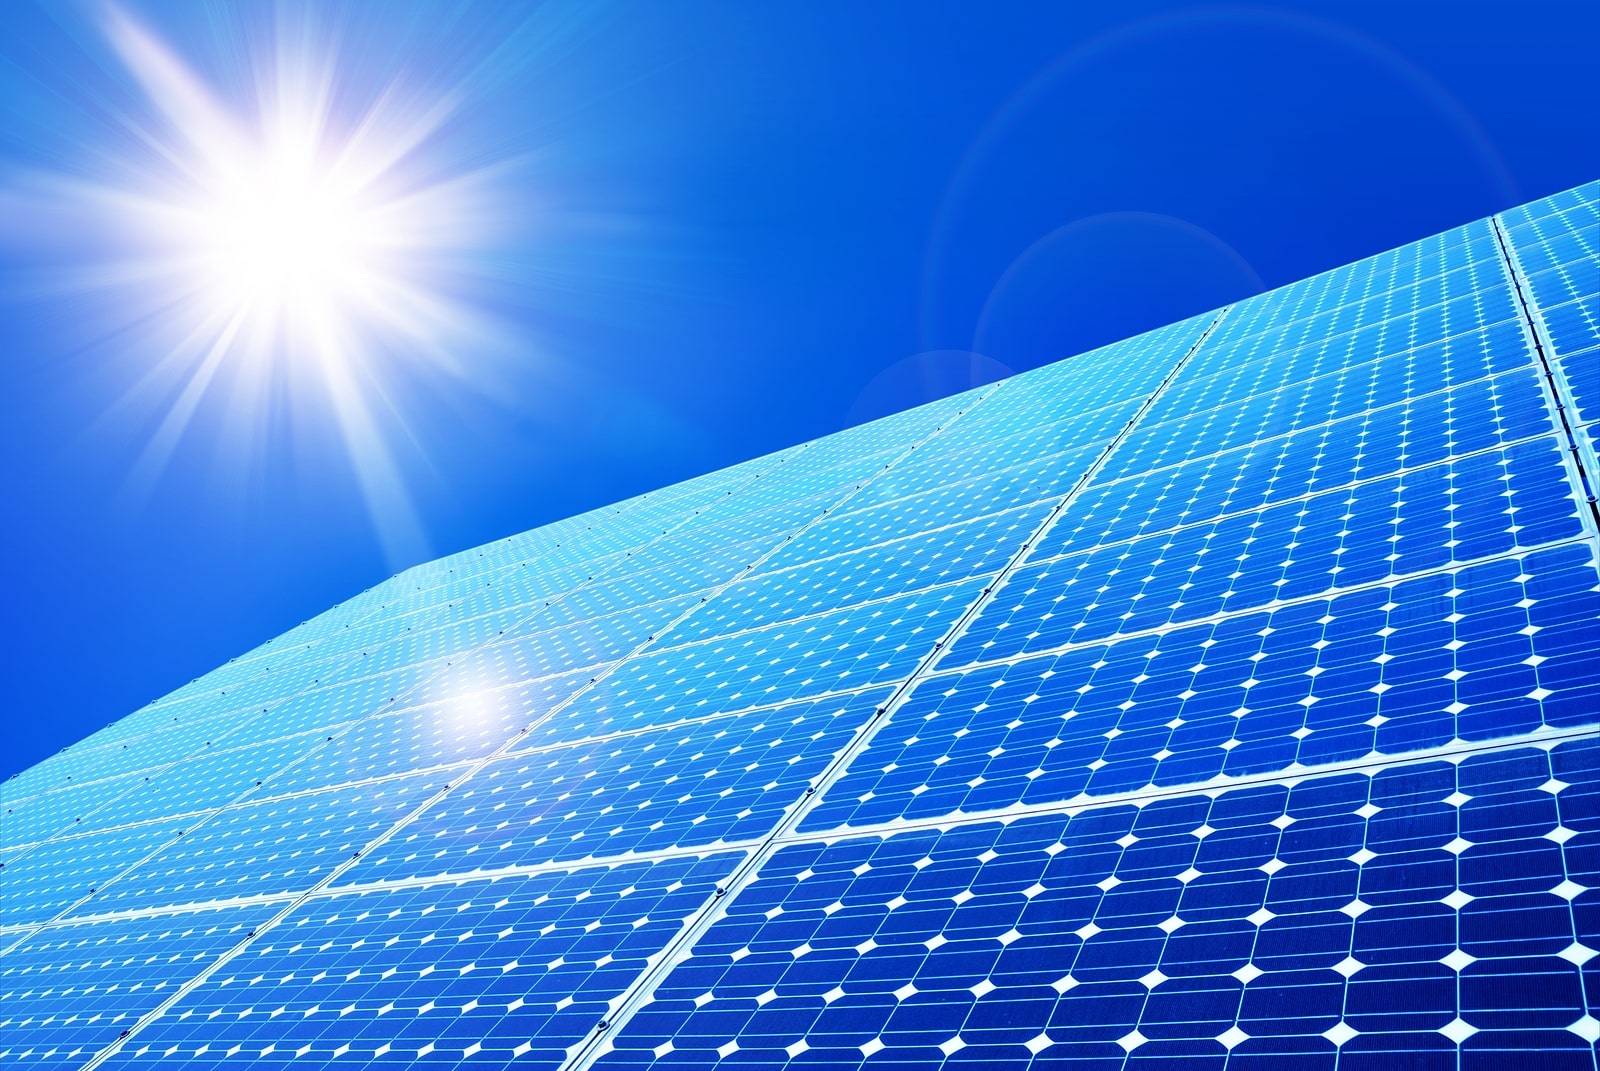 Why You Should Consider Installing Solar Panels